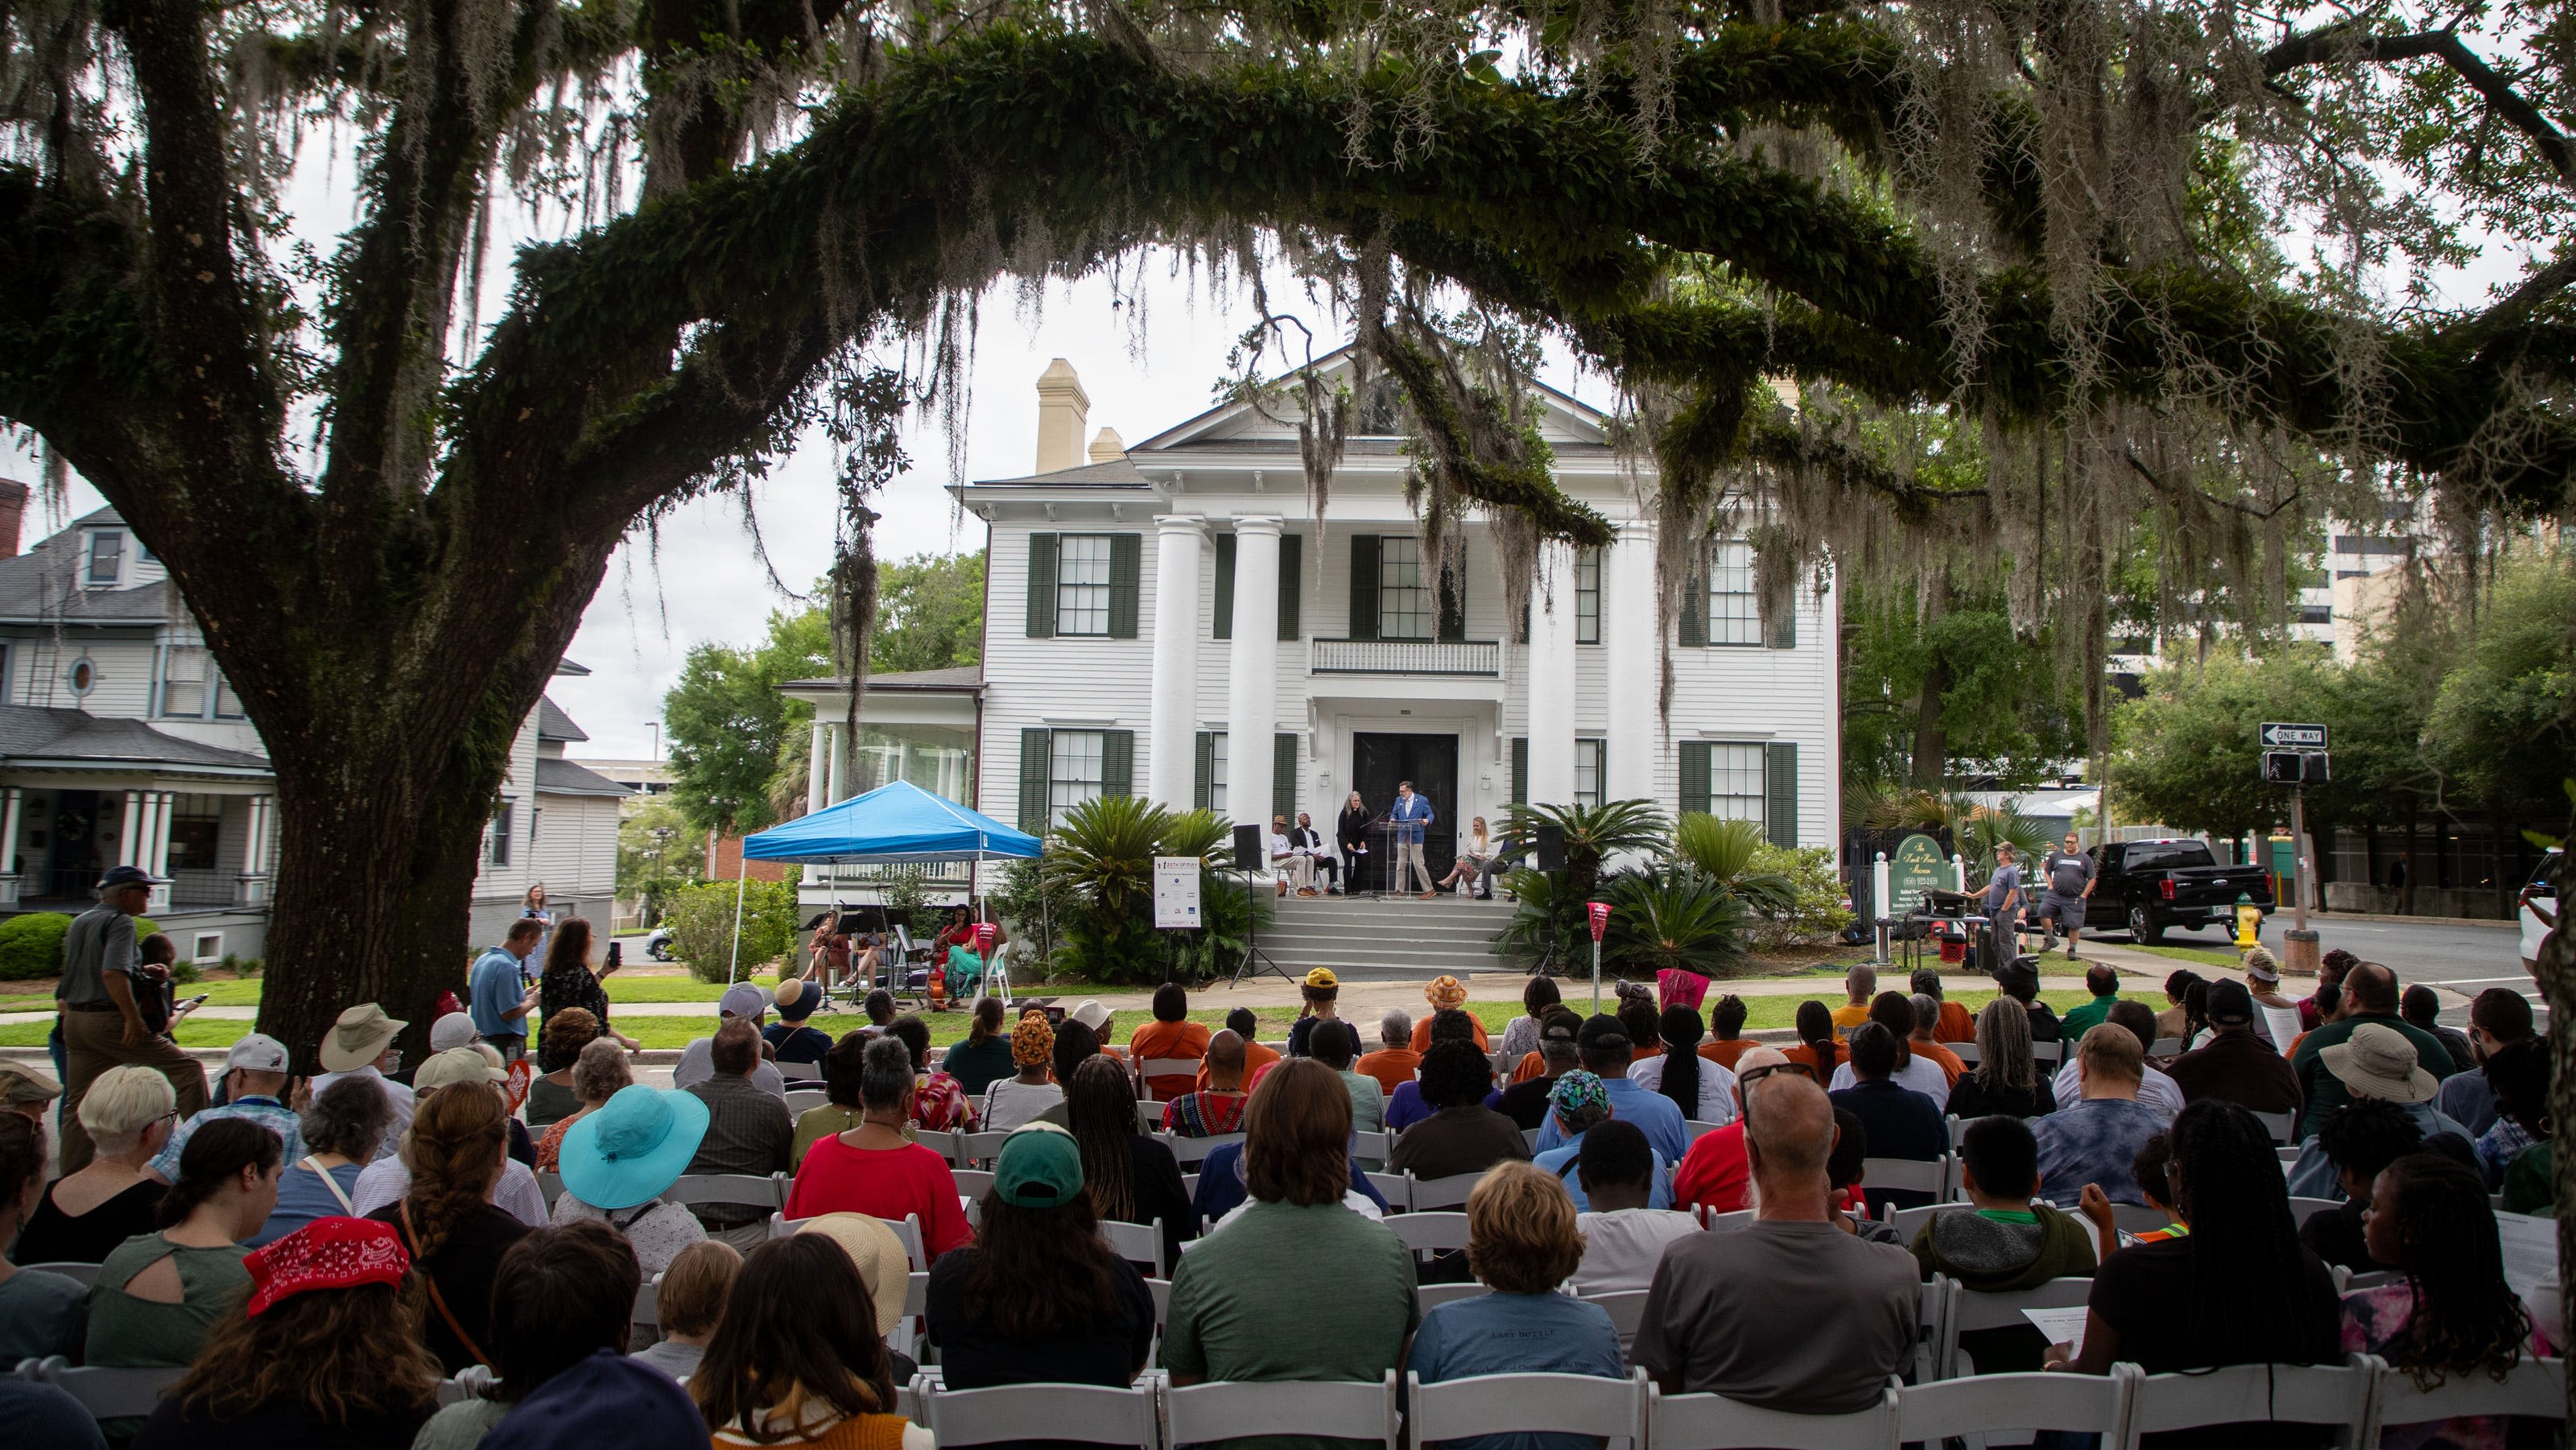 'Mayteenth' in Tallahassee: Emancipation Proclamation read publicly, 159 years later